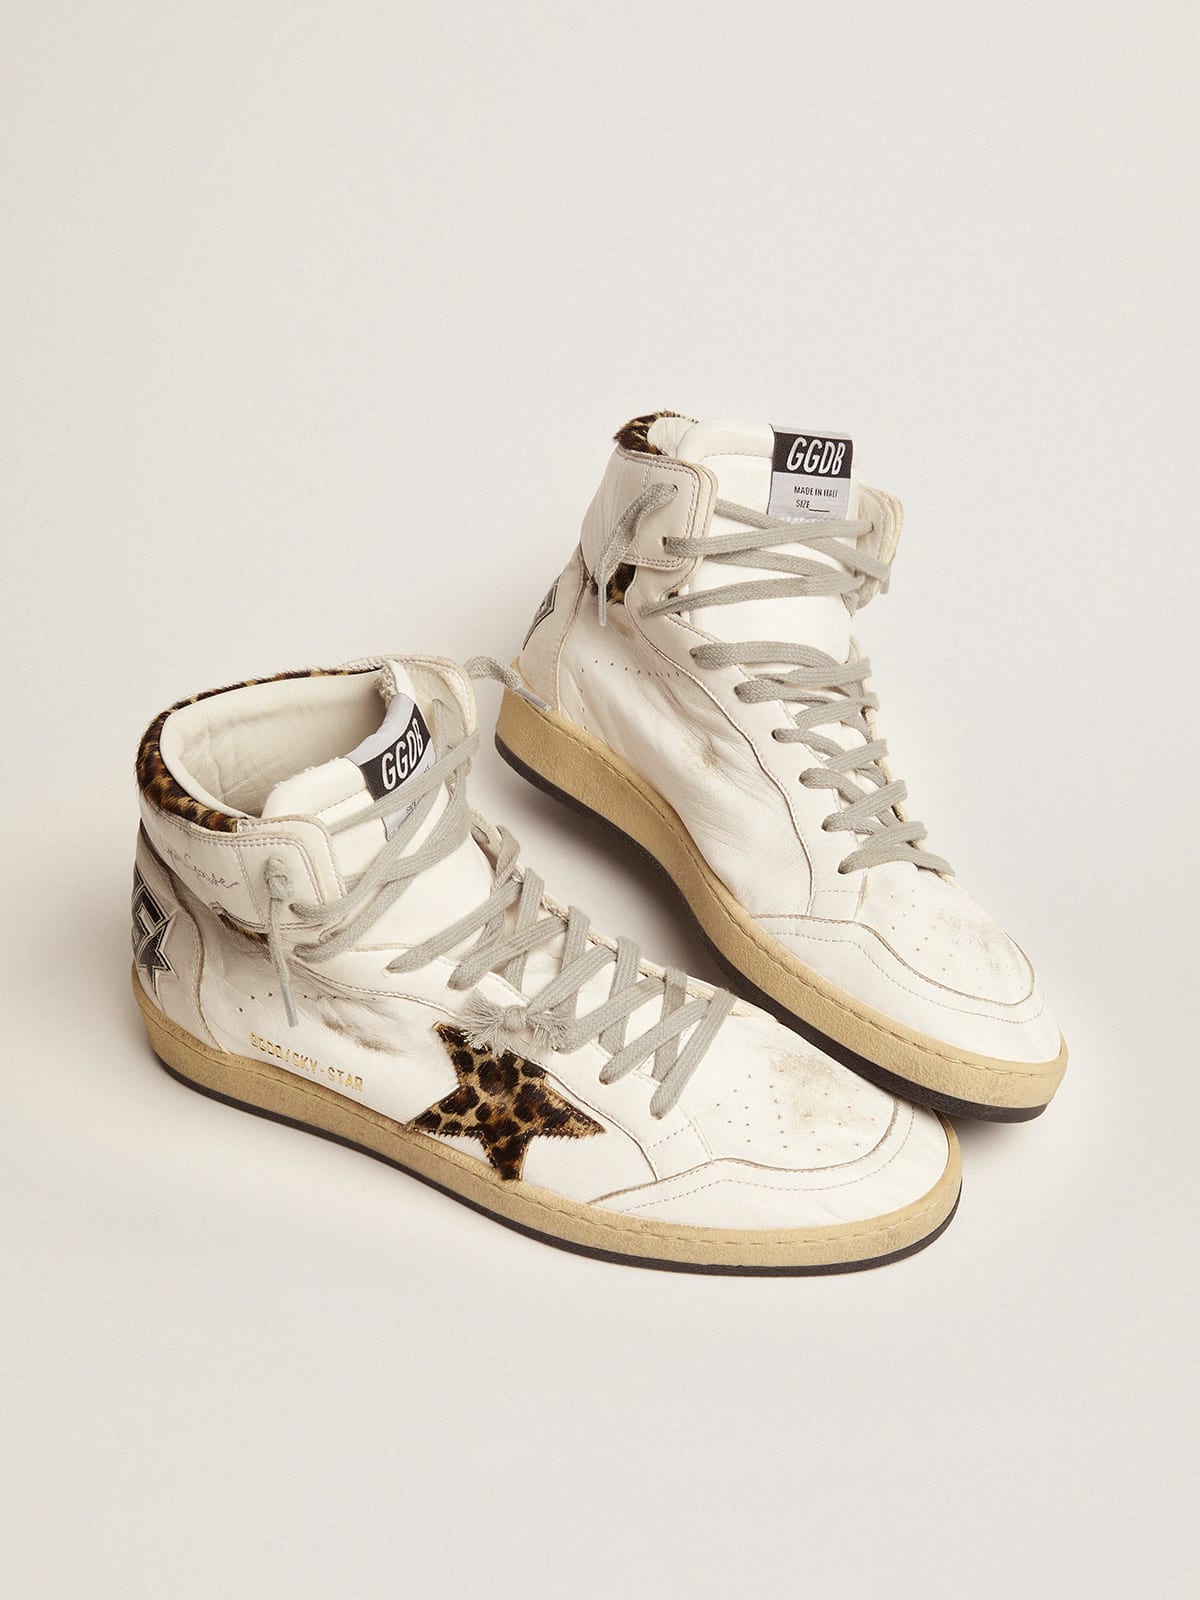 Golden Goose - Women's Sky-Star with signature and leopard print pony skin inserts in 